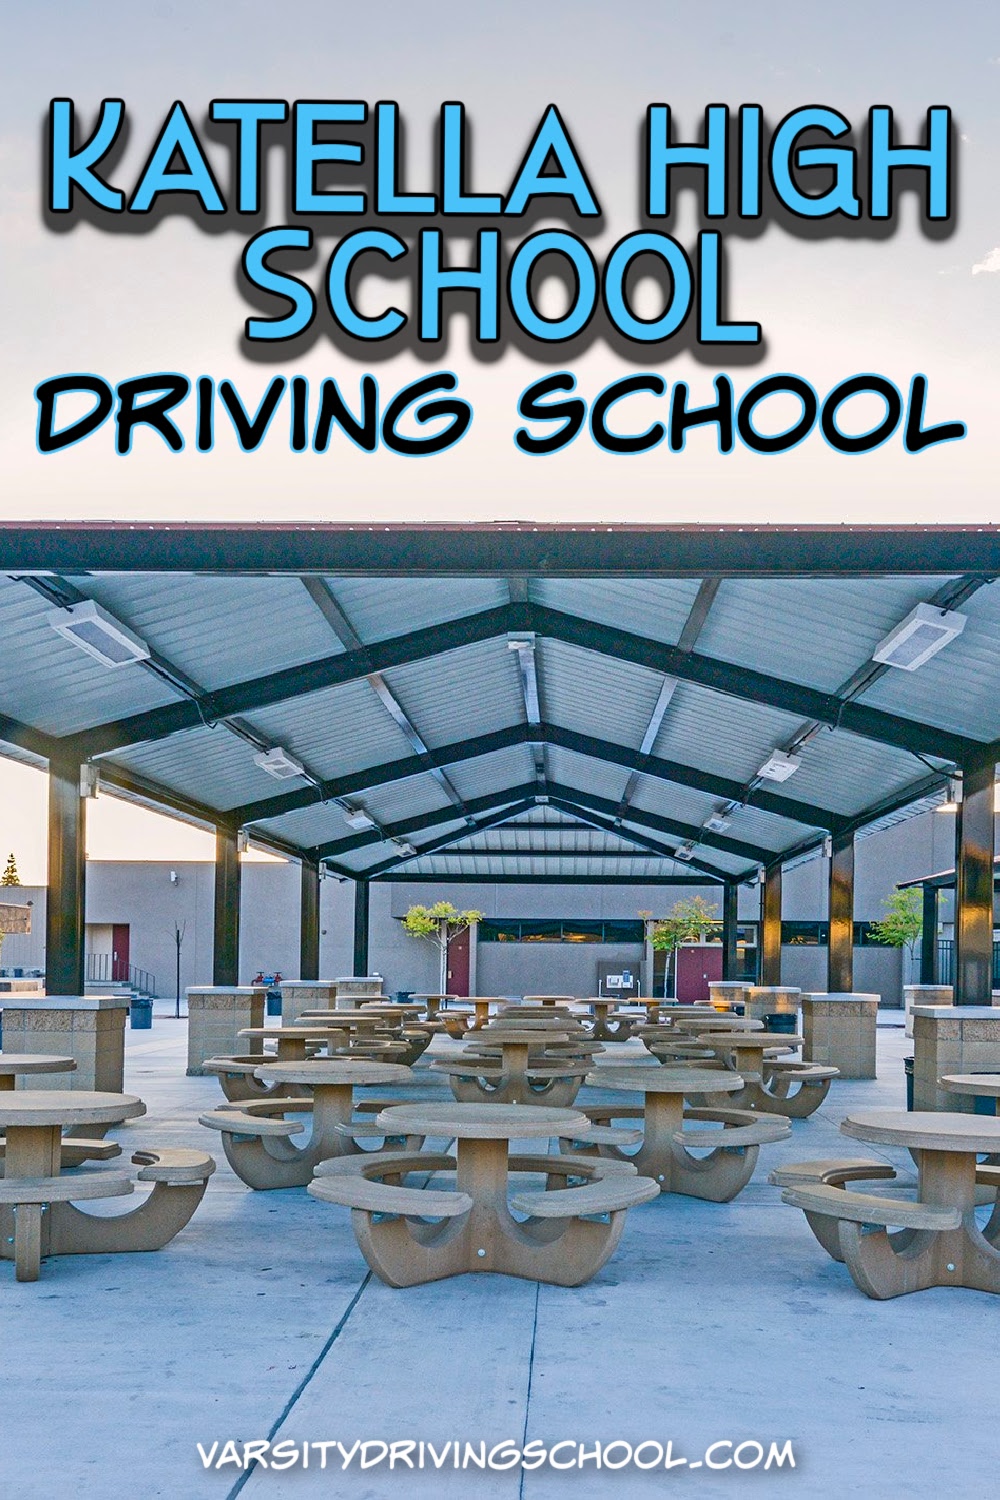 Varsity Driving School is the best Katella High School driving school for students who want to learn how to drive on their schedules.